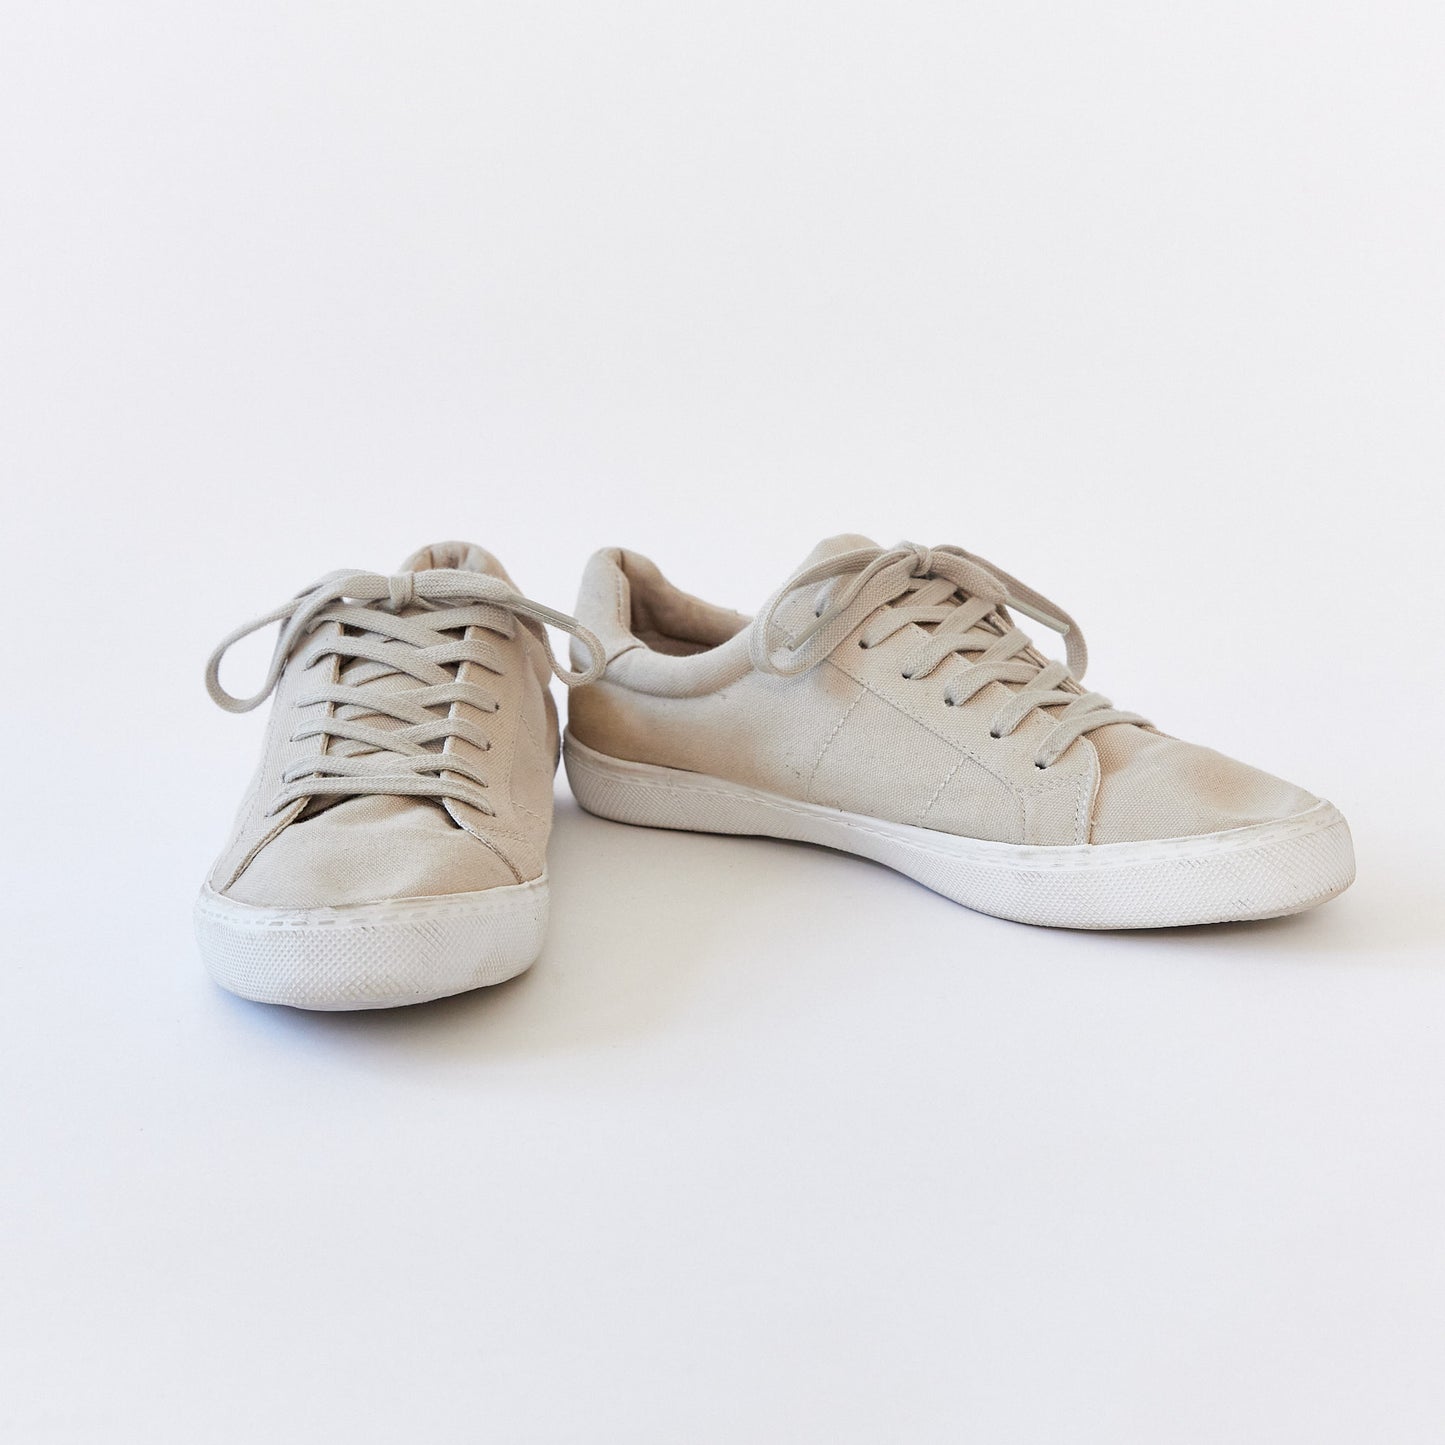 Light Grey Lace up Trainers size 7